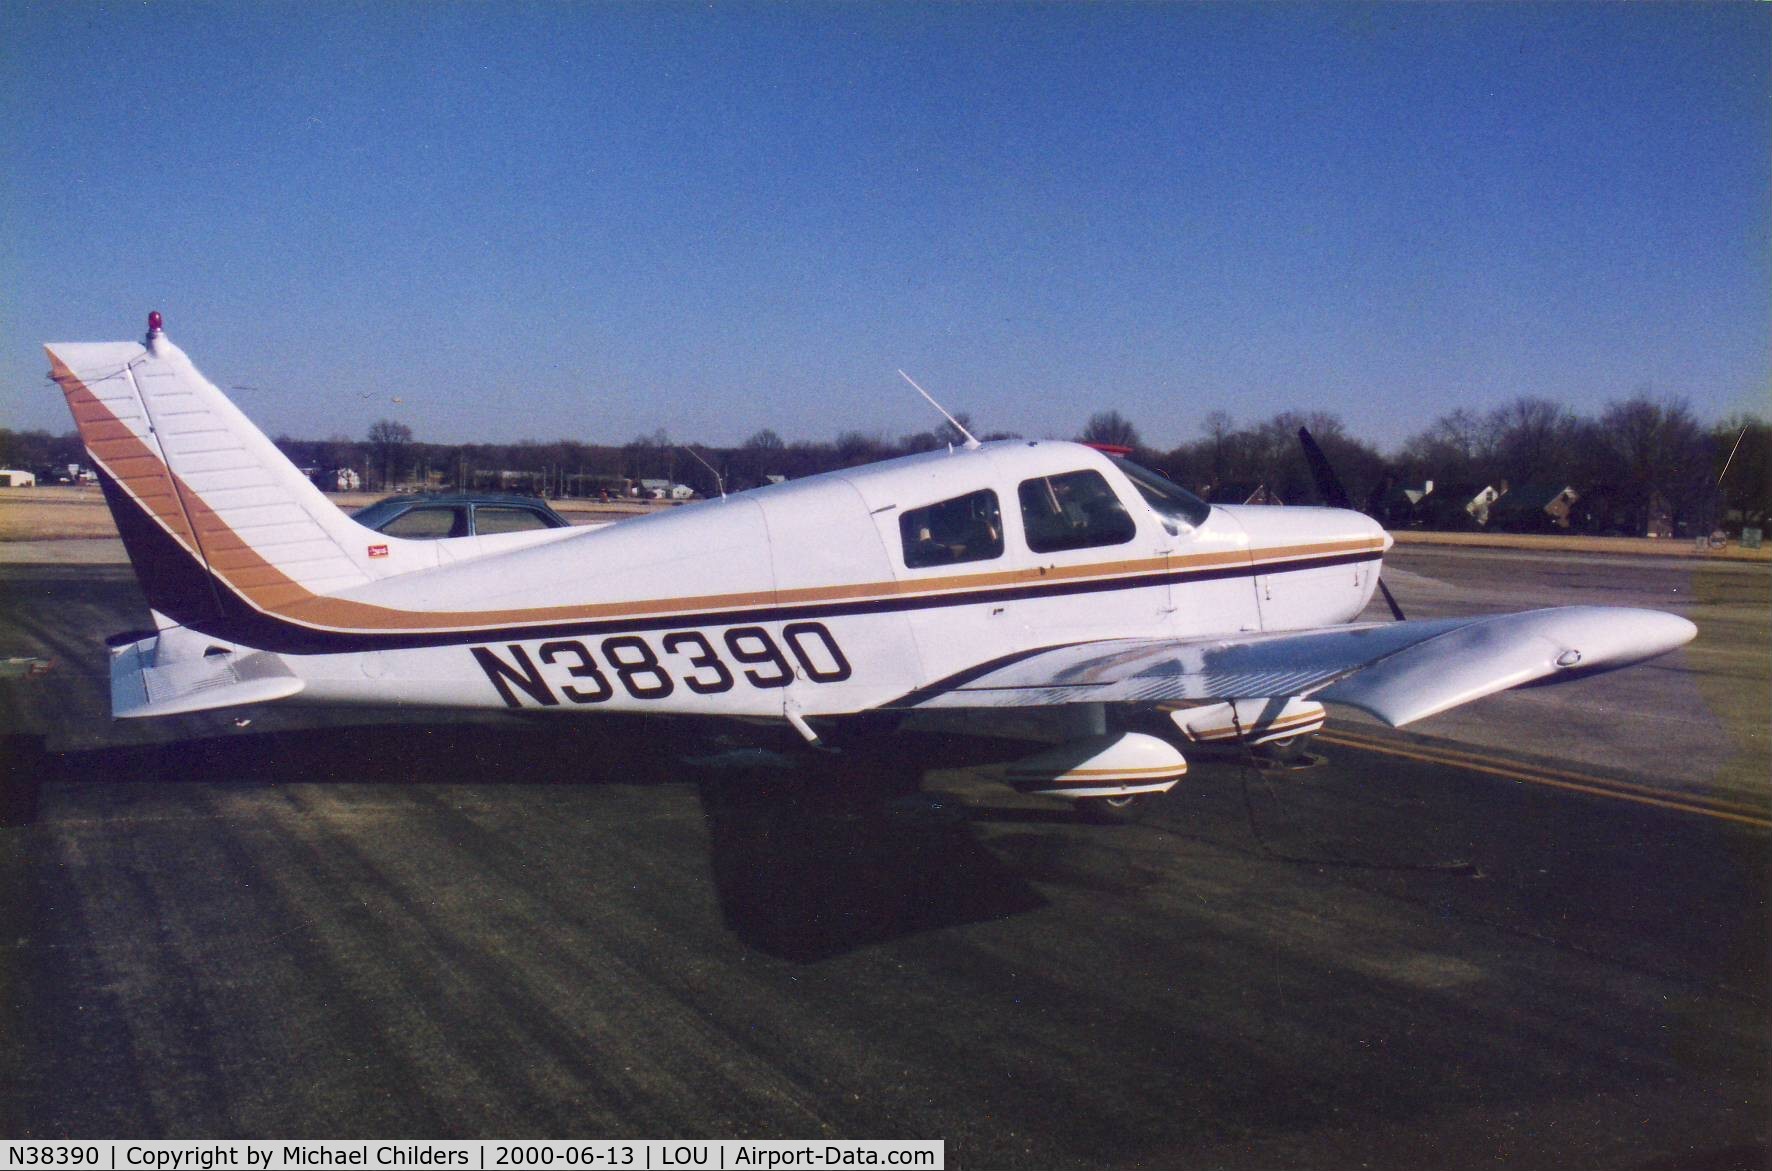 N38390, 1977 Piper PA-28-140 Cherokee C/N 28-7725279, I owned this plane for around 5  and used it as an instrument trainer and a plane for my son to learn to fly in. The plane was sold in 2003 to an FBO located in Ohio. I learned around six months later the plane was destroyed making a forced landing.